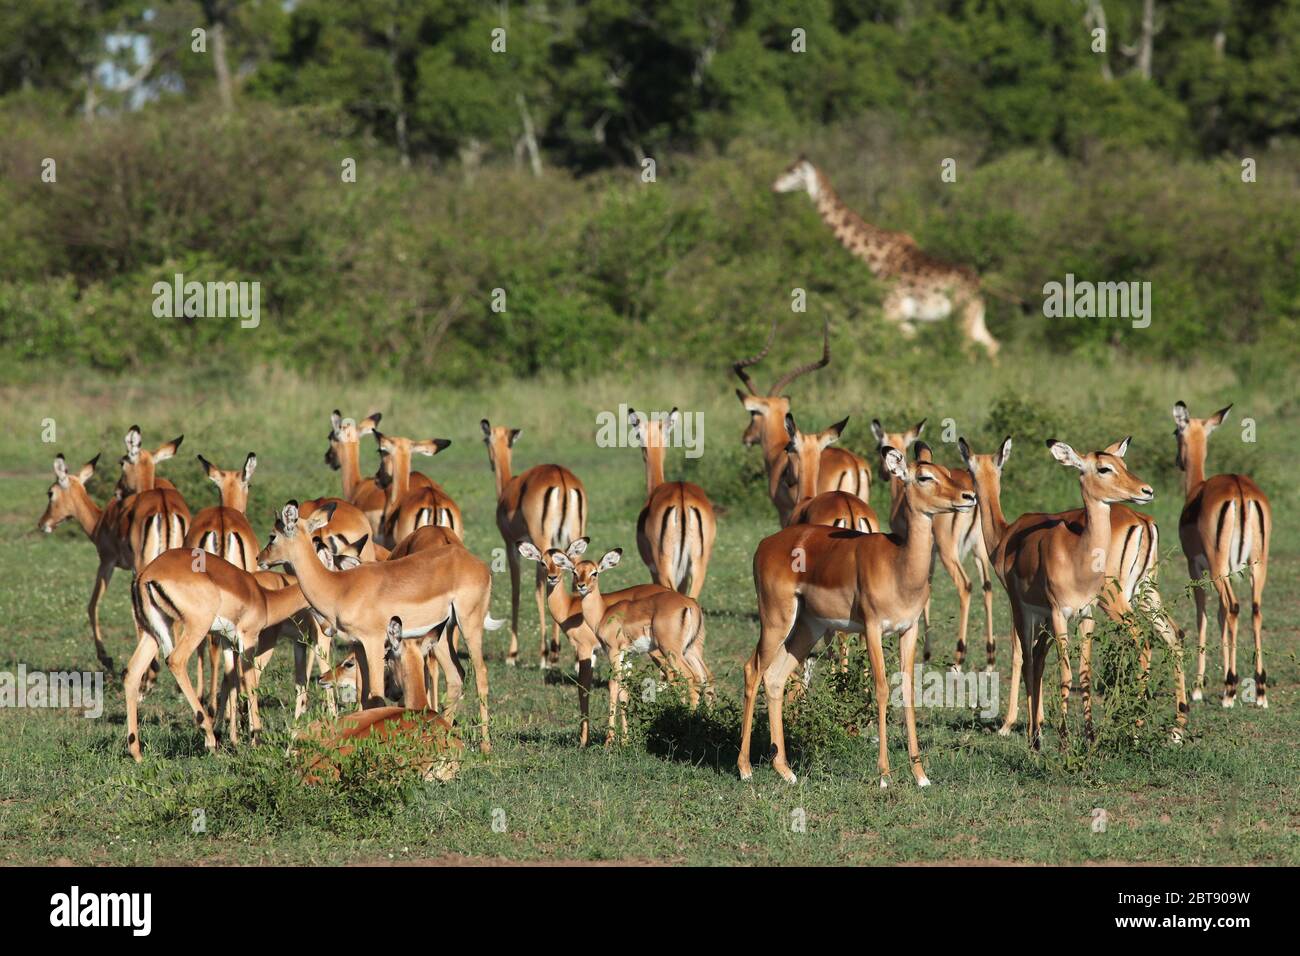 a group of Impala antelopes stands watchful in the morning light in the Kenyan savannah, in the background scrubland with a blurred giraffe Stock Photo